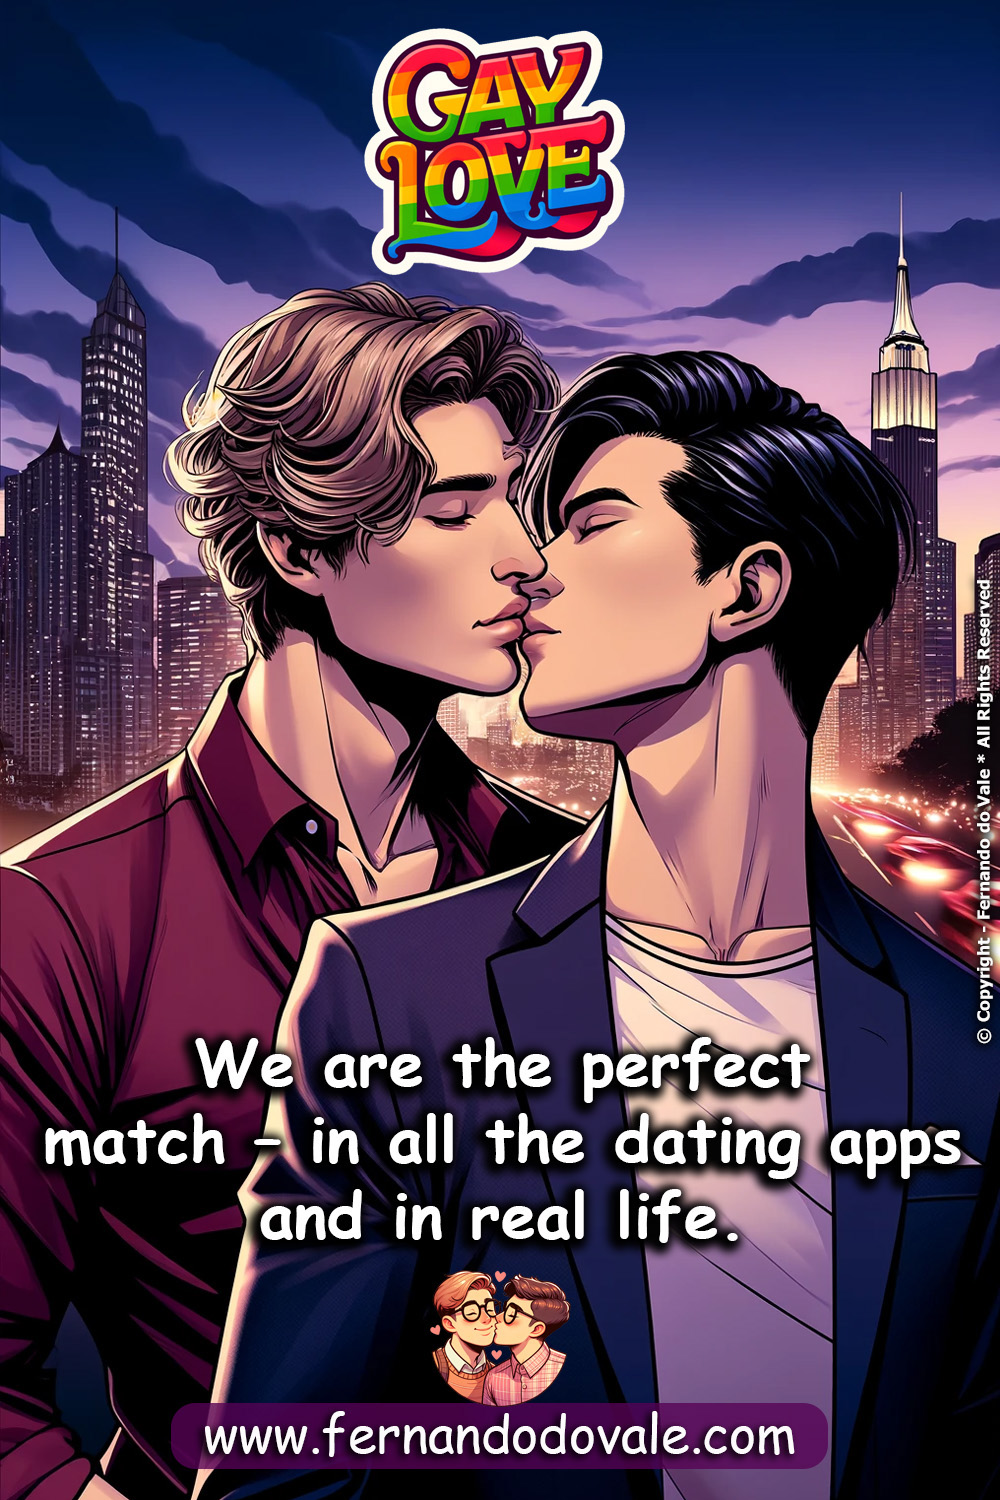 Real-Life-Dating-Apps-Gay-Love-Illustration